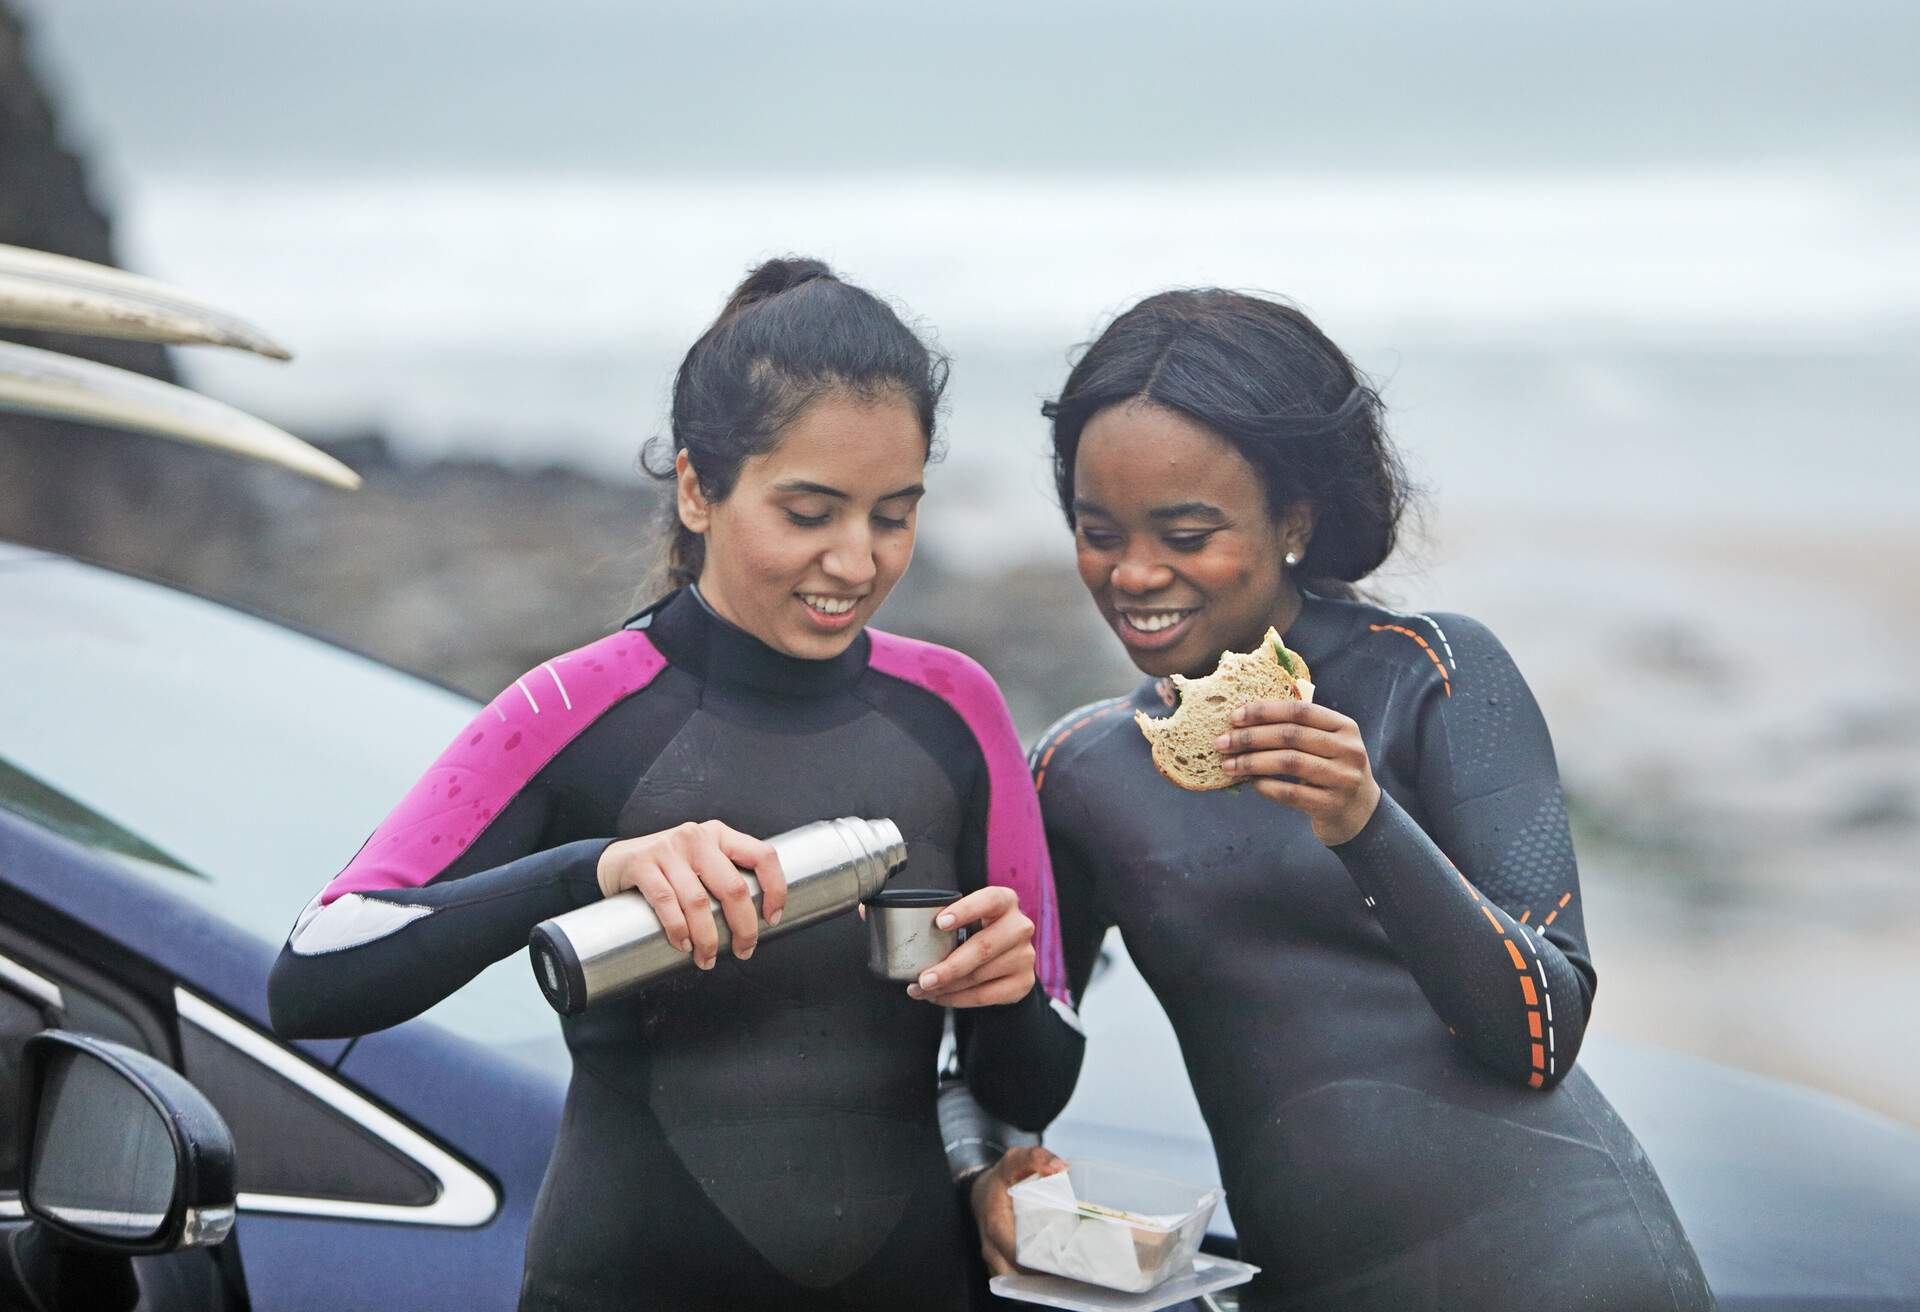 theme_car_people_gay_couple_friends_surf_food_gettyimages-1080959520_universal_within-usage-period_83071